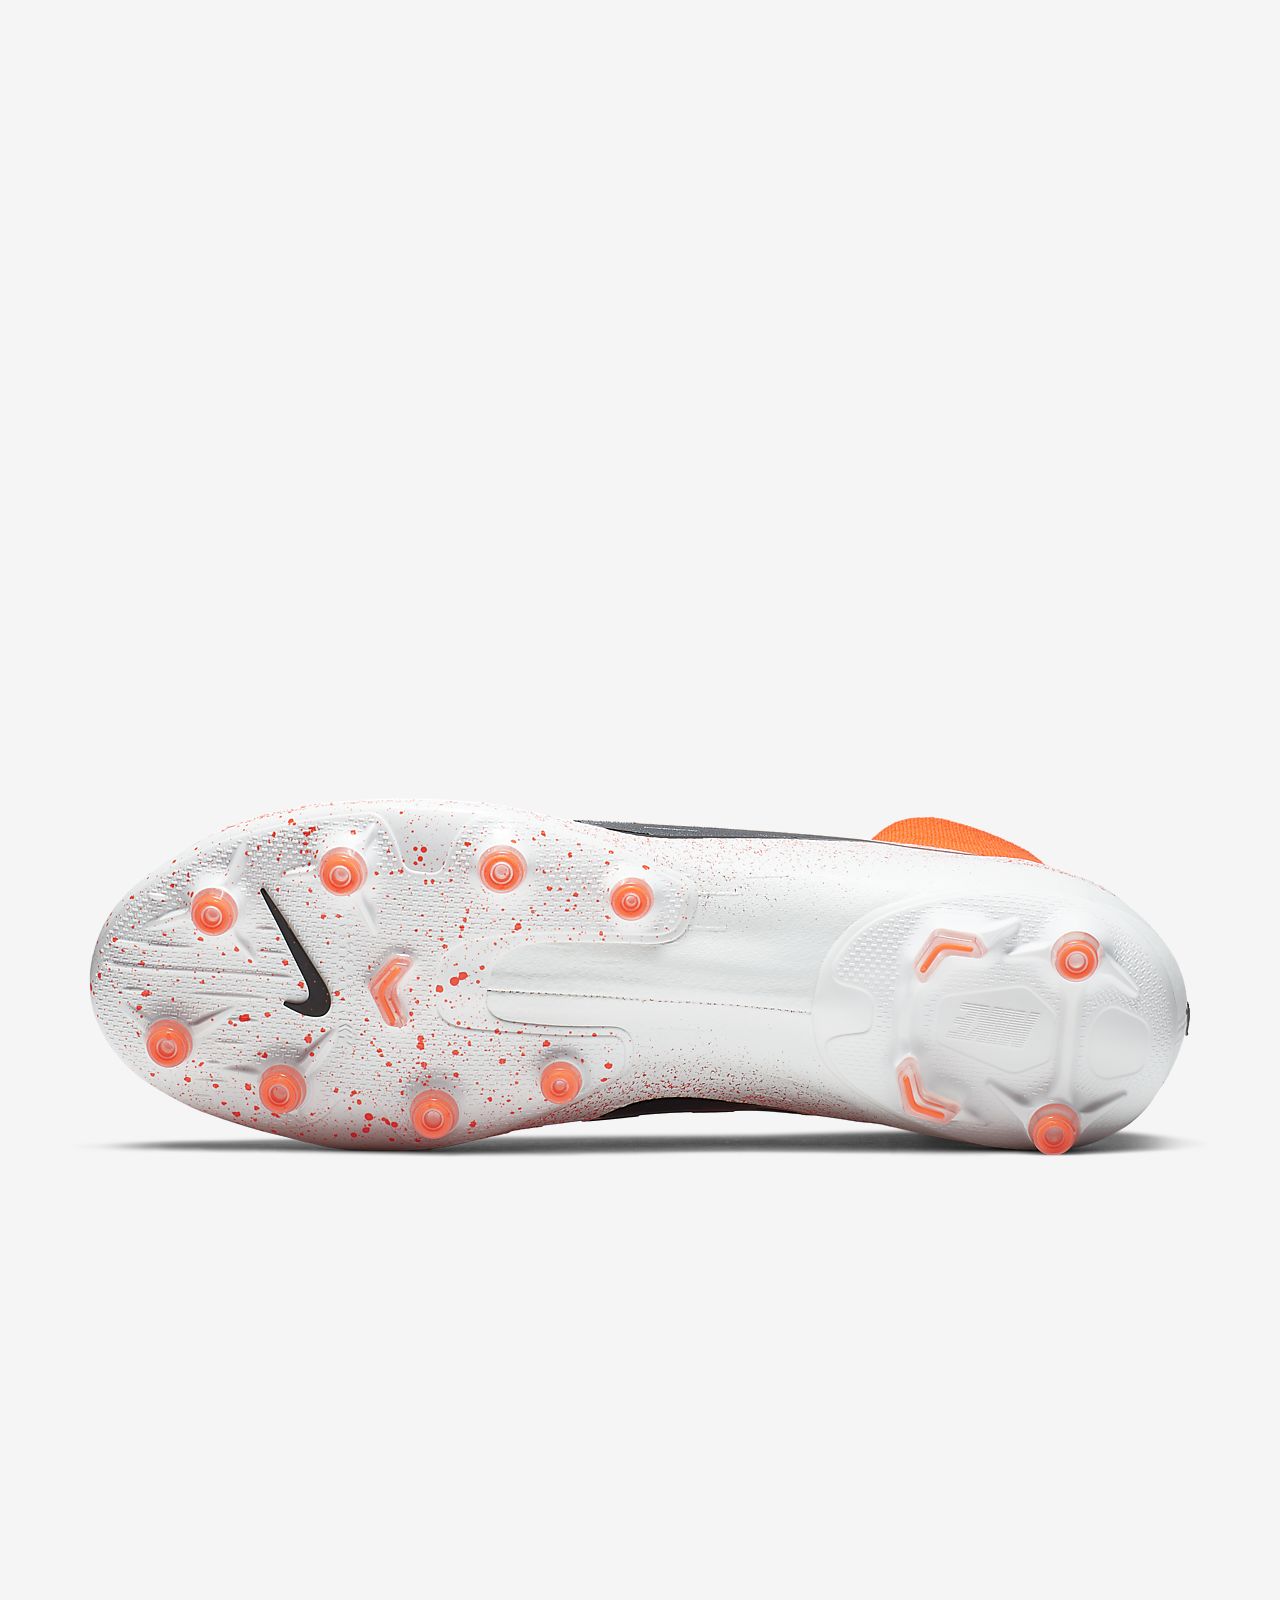 Nike Mercurial Superfly 6 Pro AG PRO Soccer Cleats Soccer